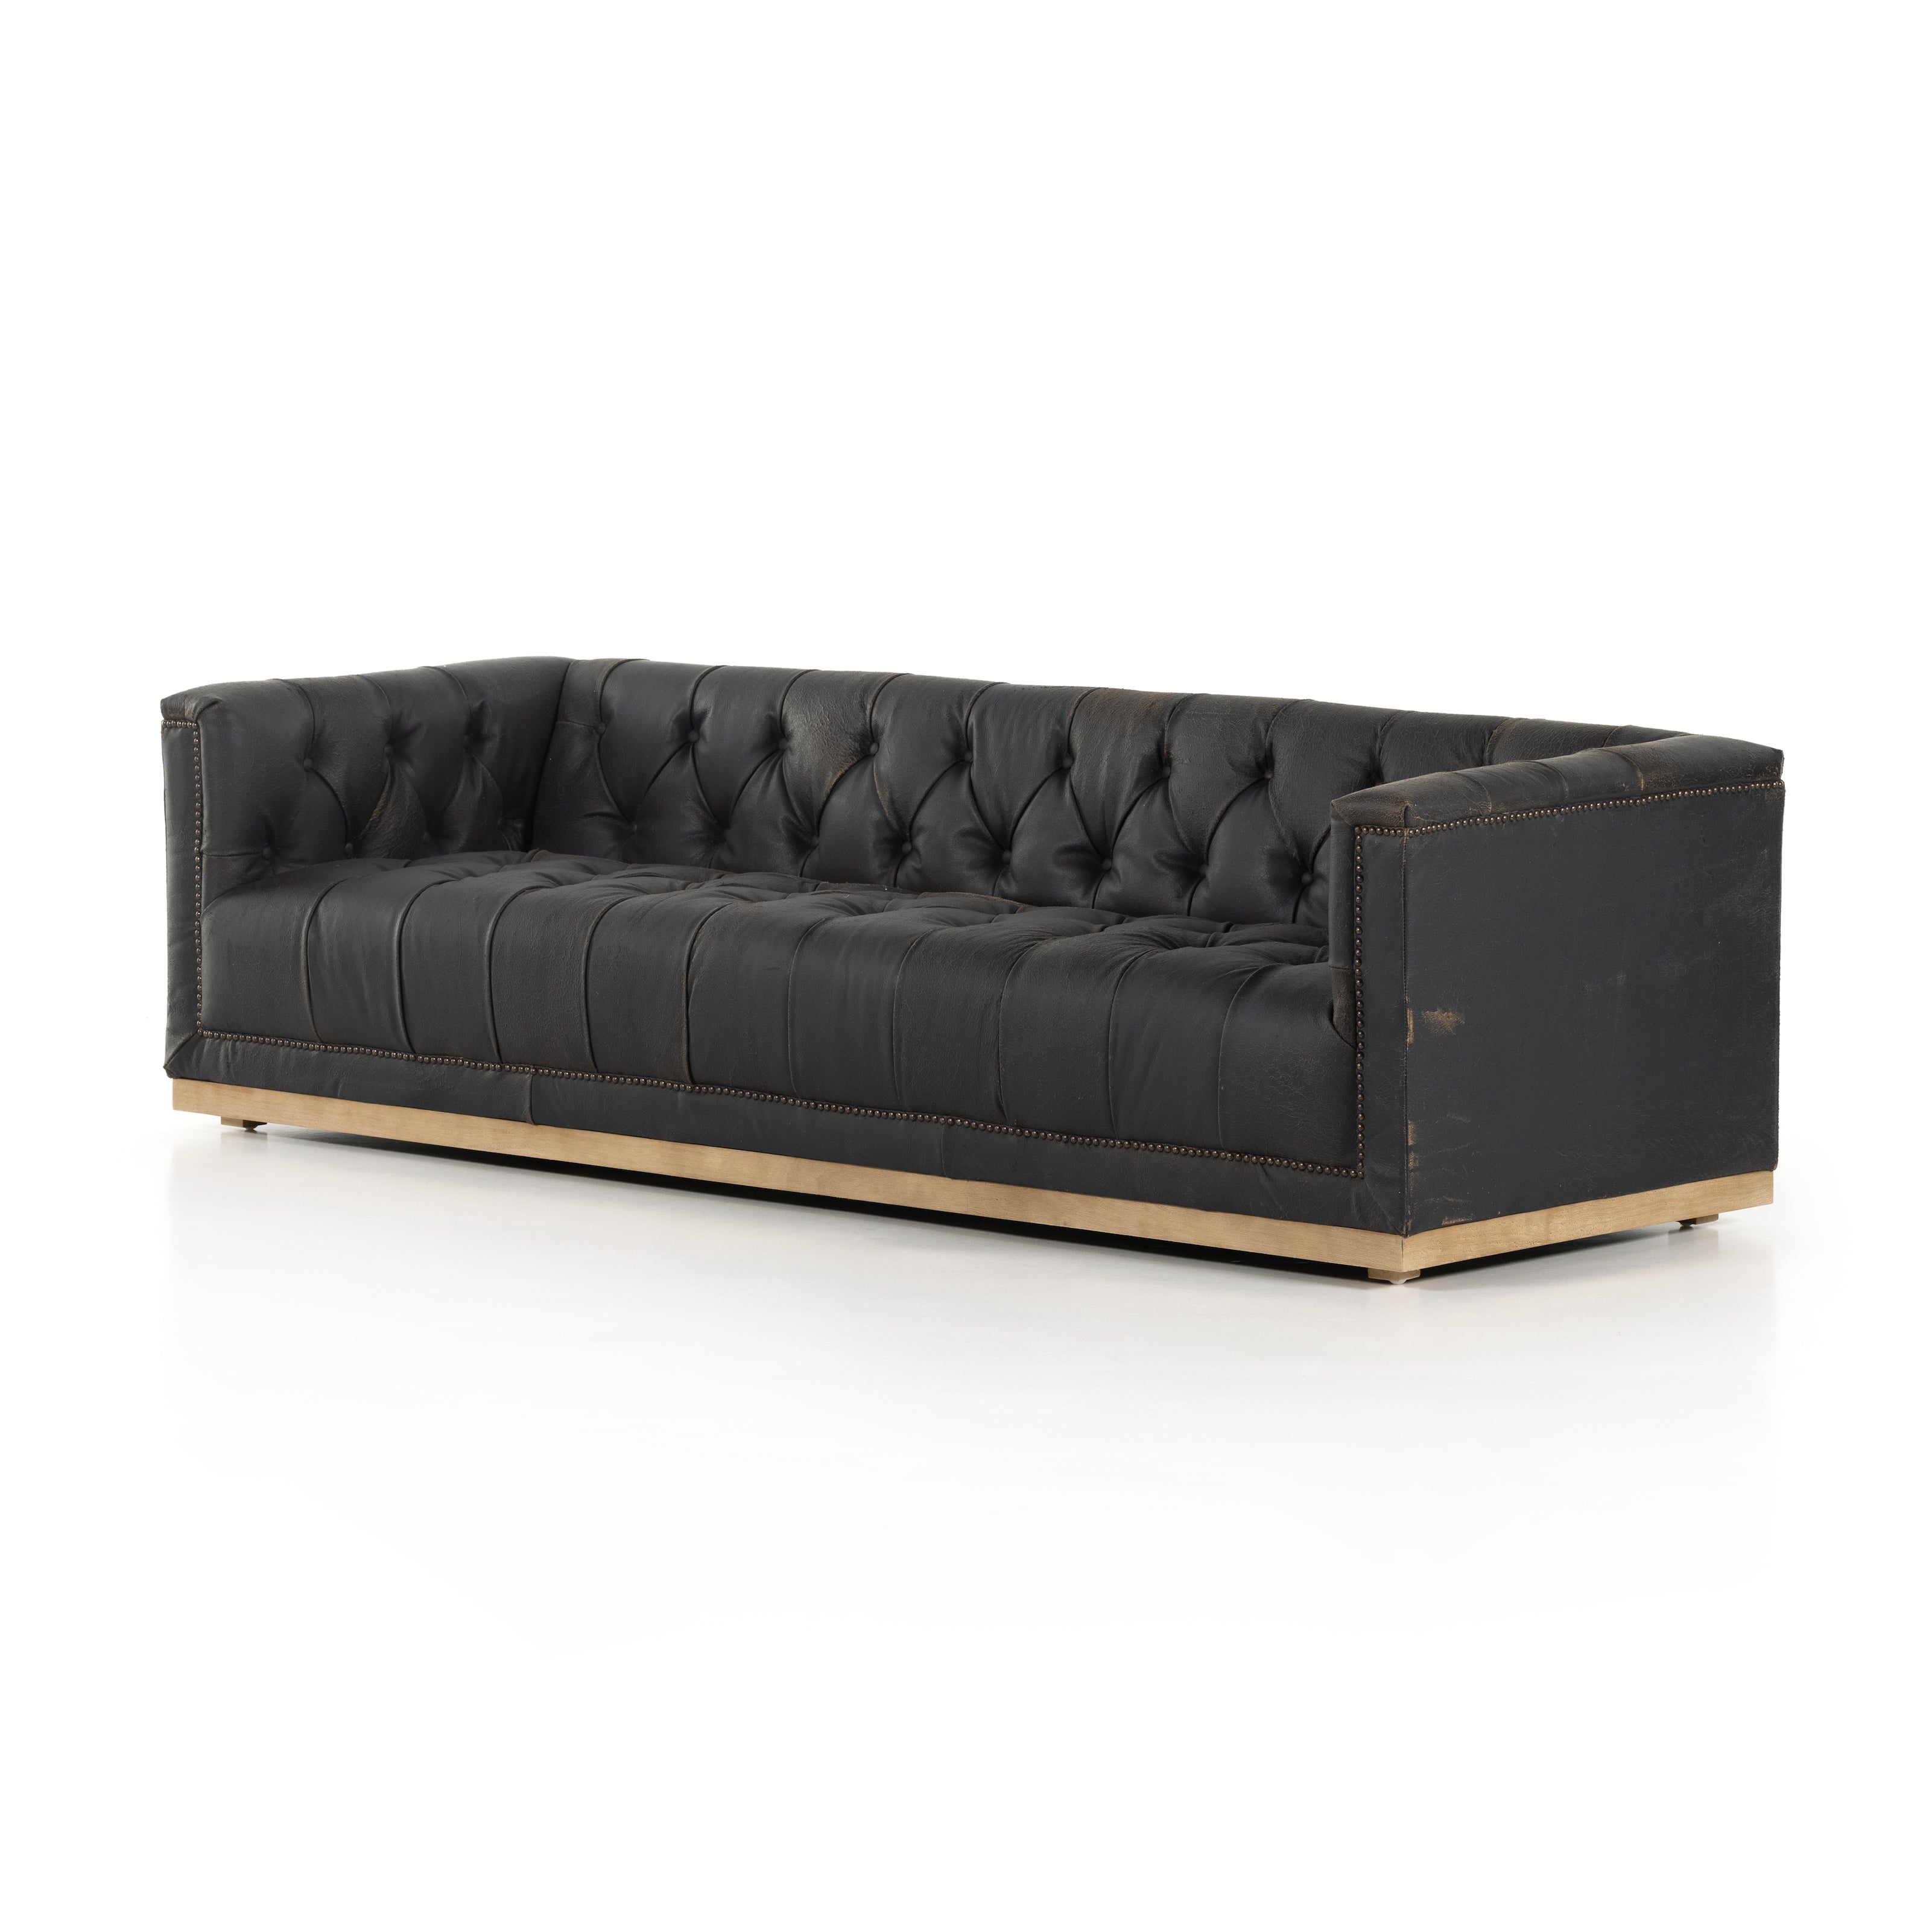 Manchester Leather Sofa